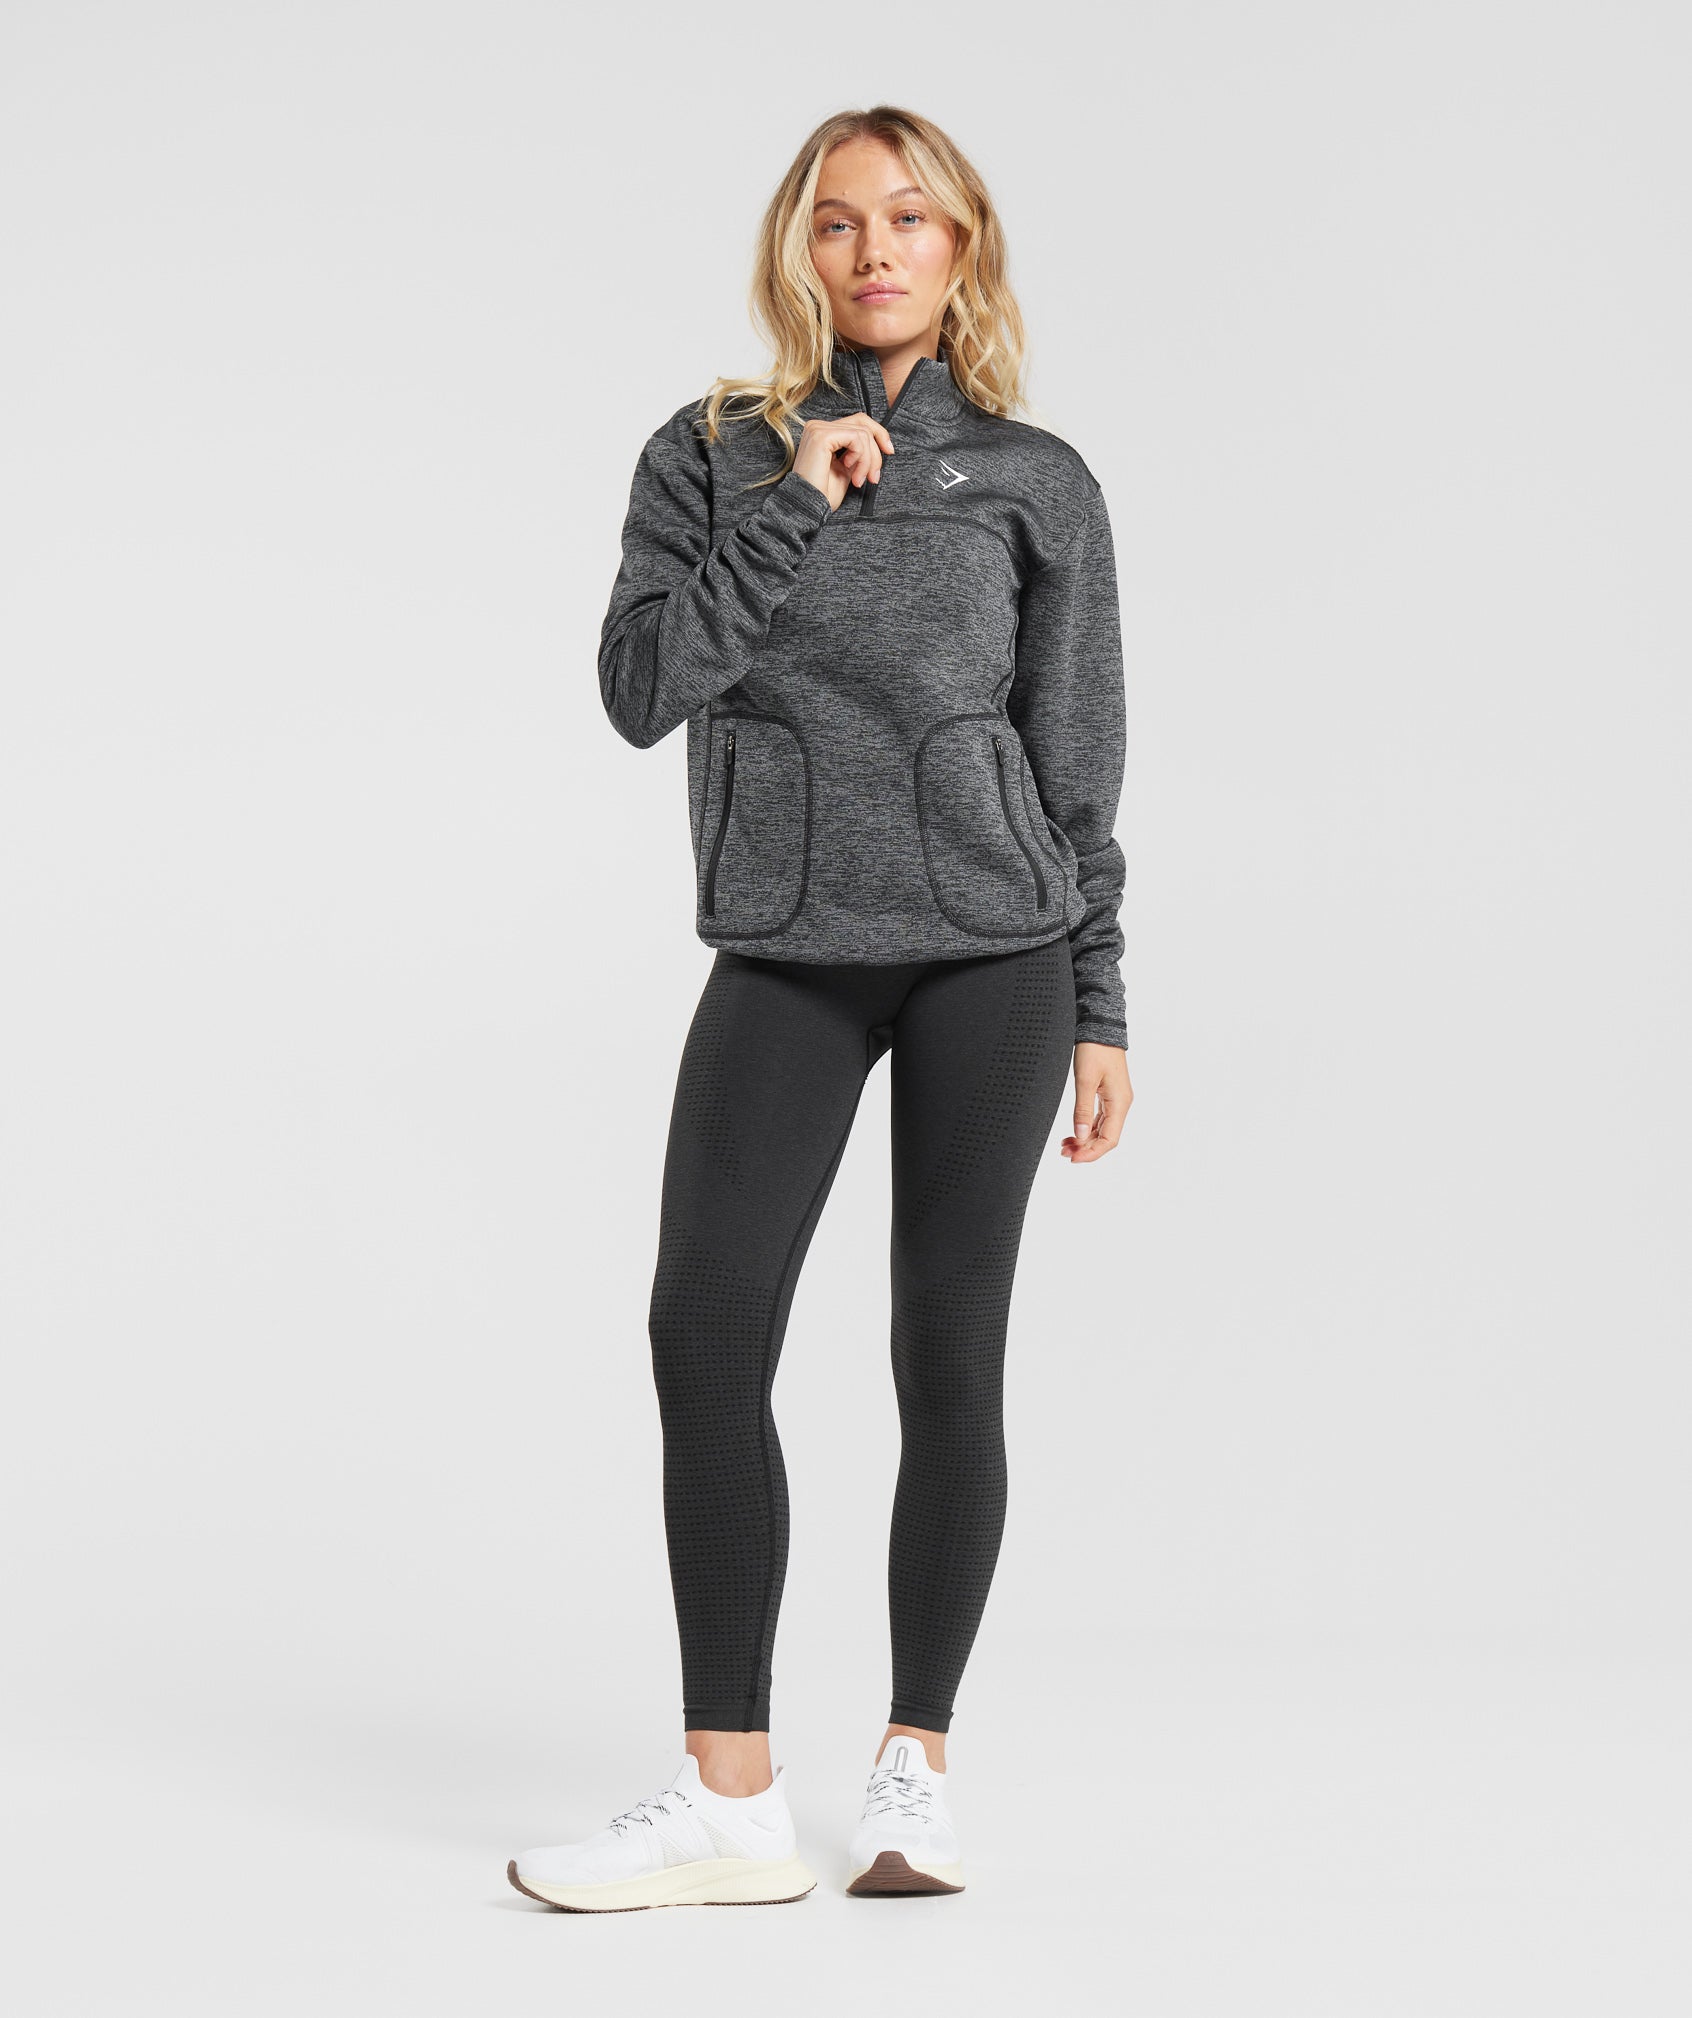 Thermal Fleece 1/4 Zip Pullover in Black/Pitch Grey - view 4